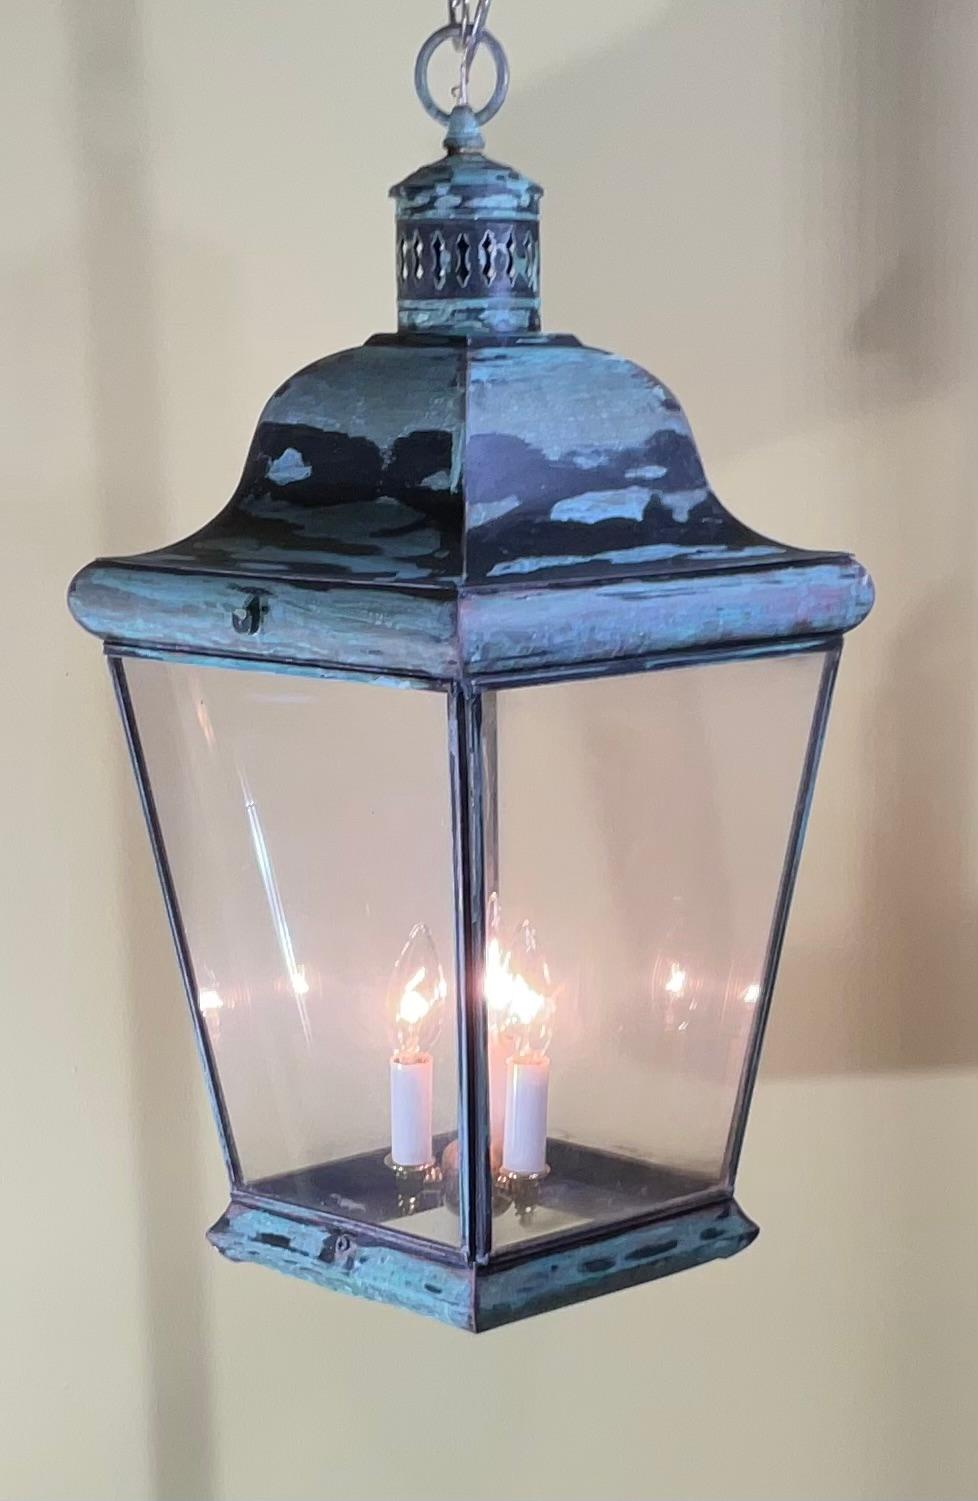 elegant hanging lantern made of solid brass, with three 40/watt lights 
Original clear acrylic sides.
Very nice patina 
New Canopy and chain included.

